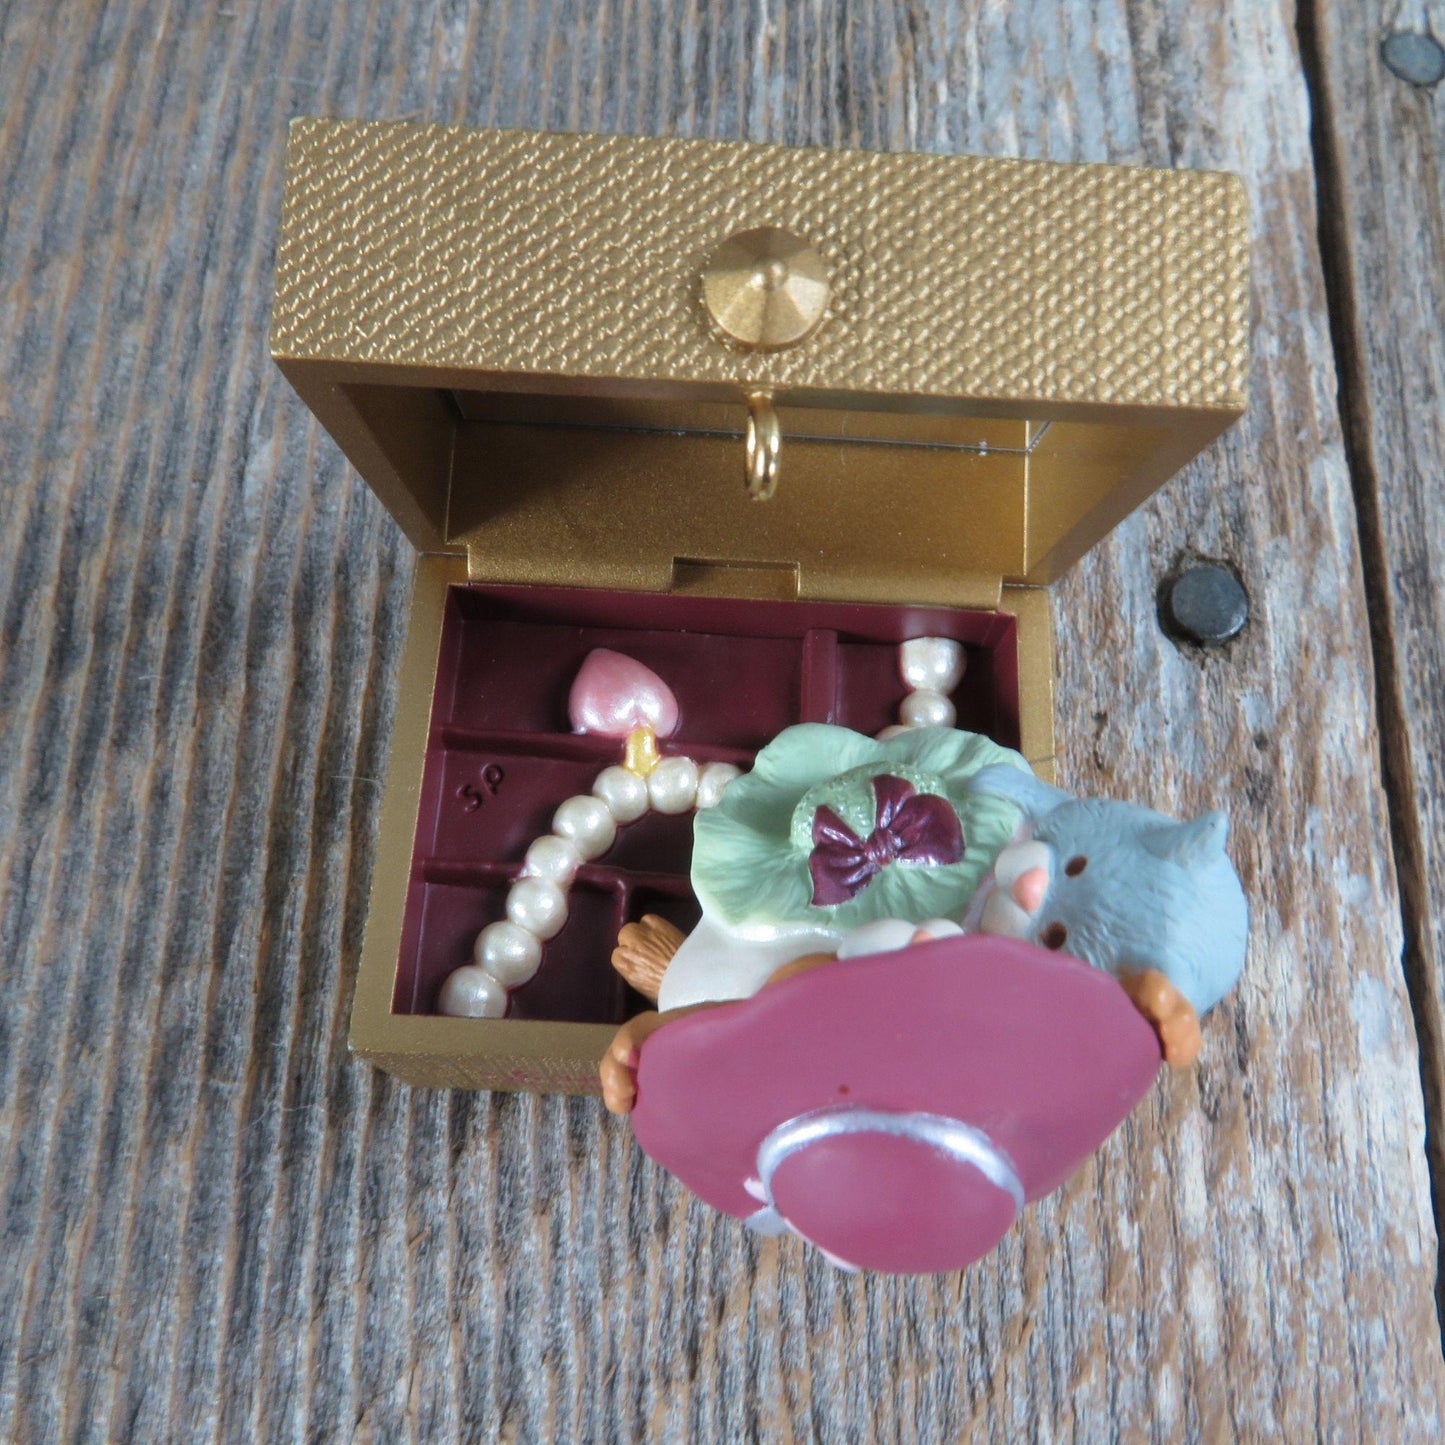 Vintage Cat Kitten Sisters to Sister Jewelry Box Ornament Hallmark Sisters are Treasured Friends 1997